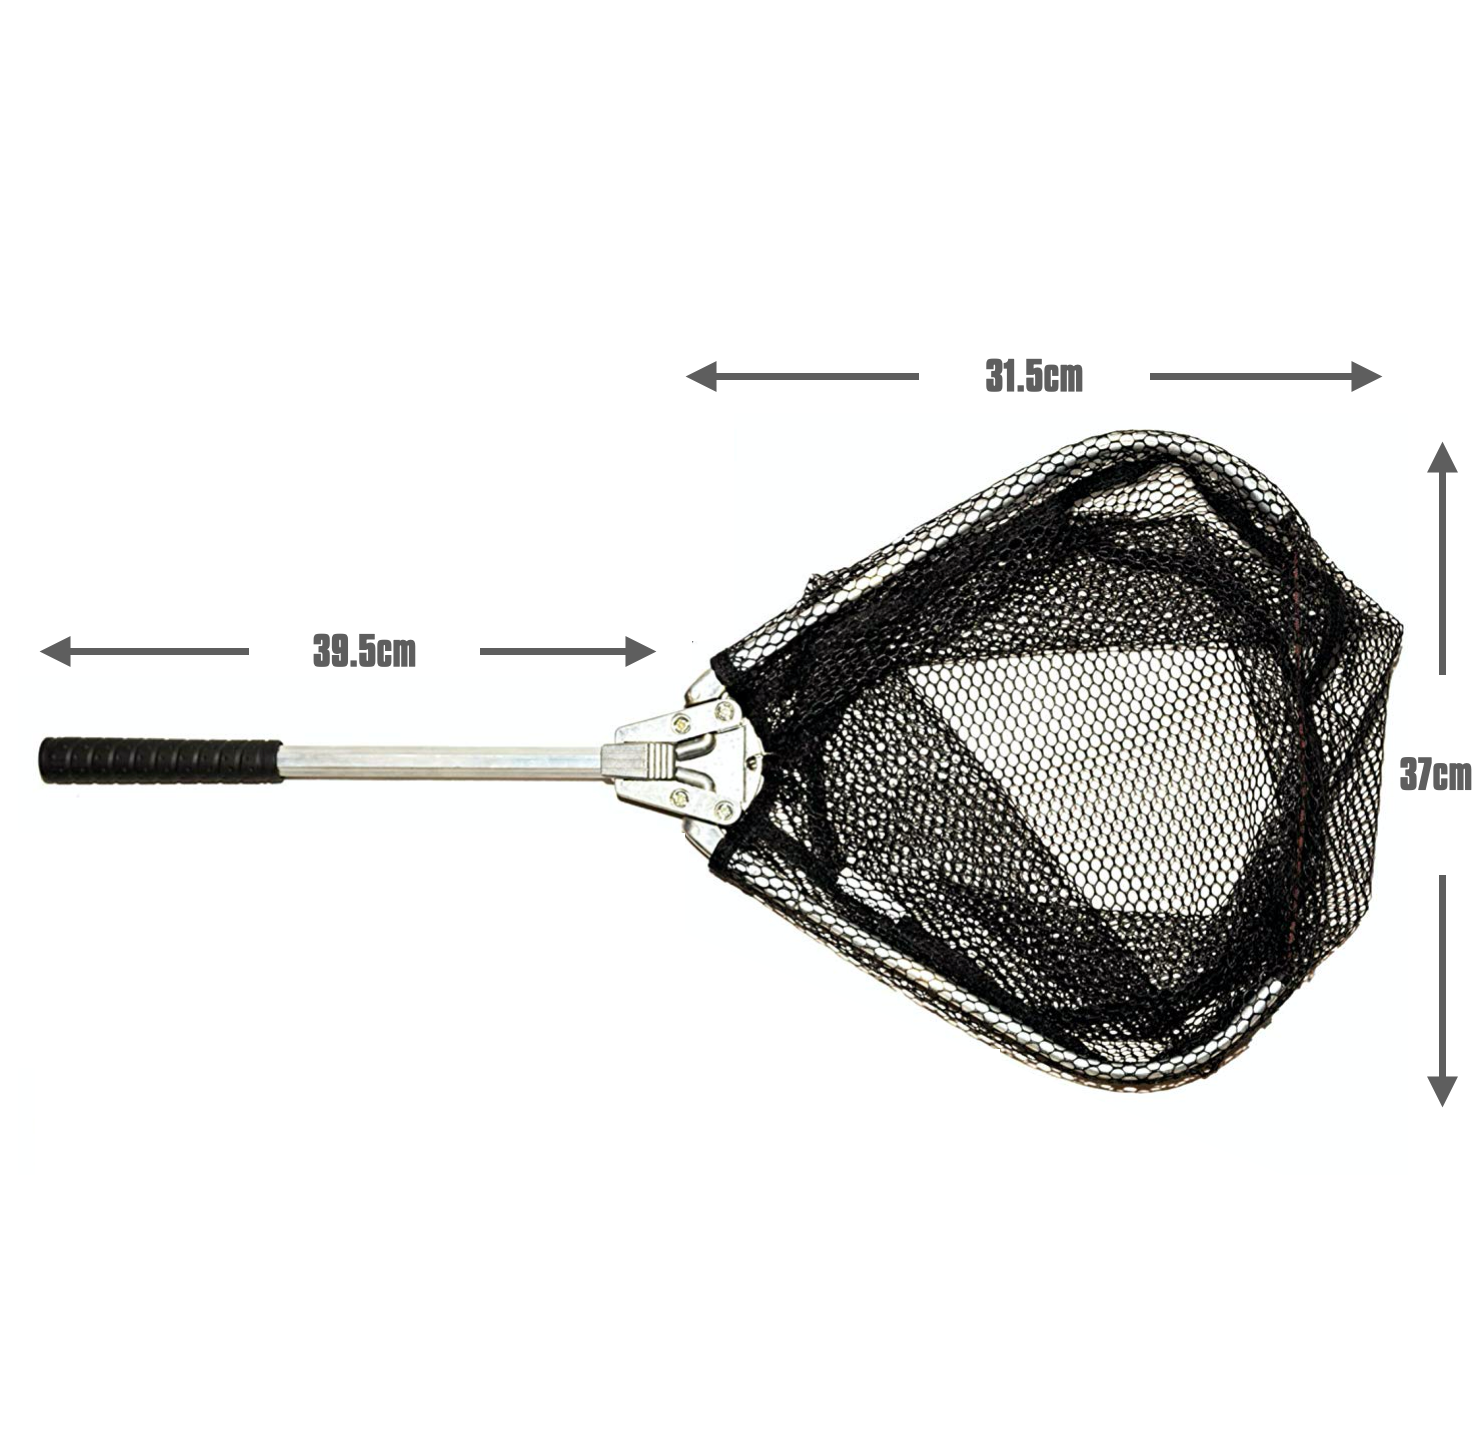 Travel Fishing  Super Compact Landing Net – Rigged and Ready